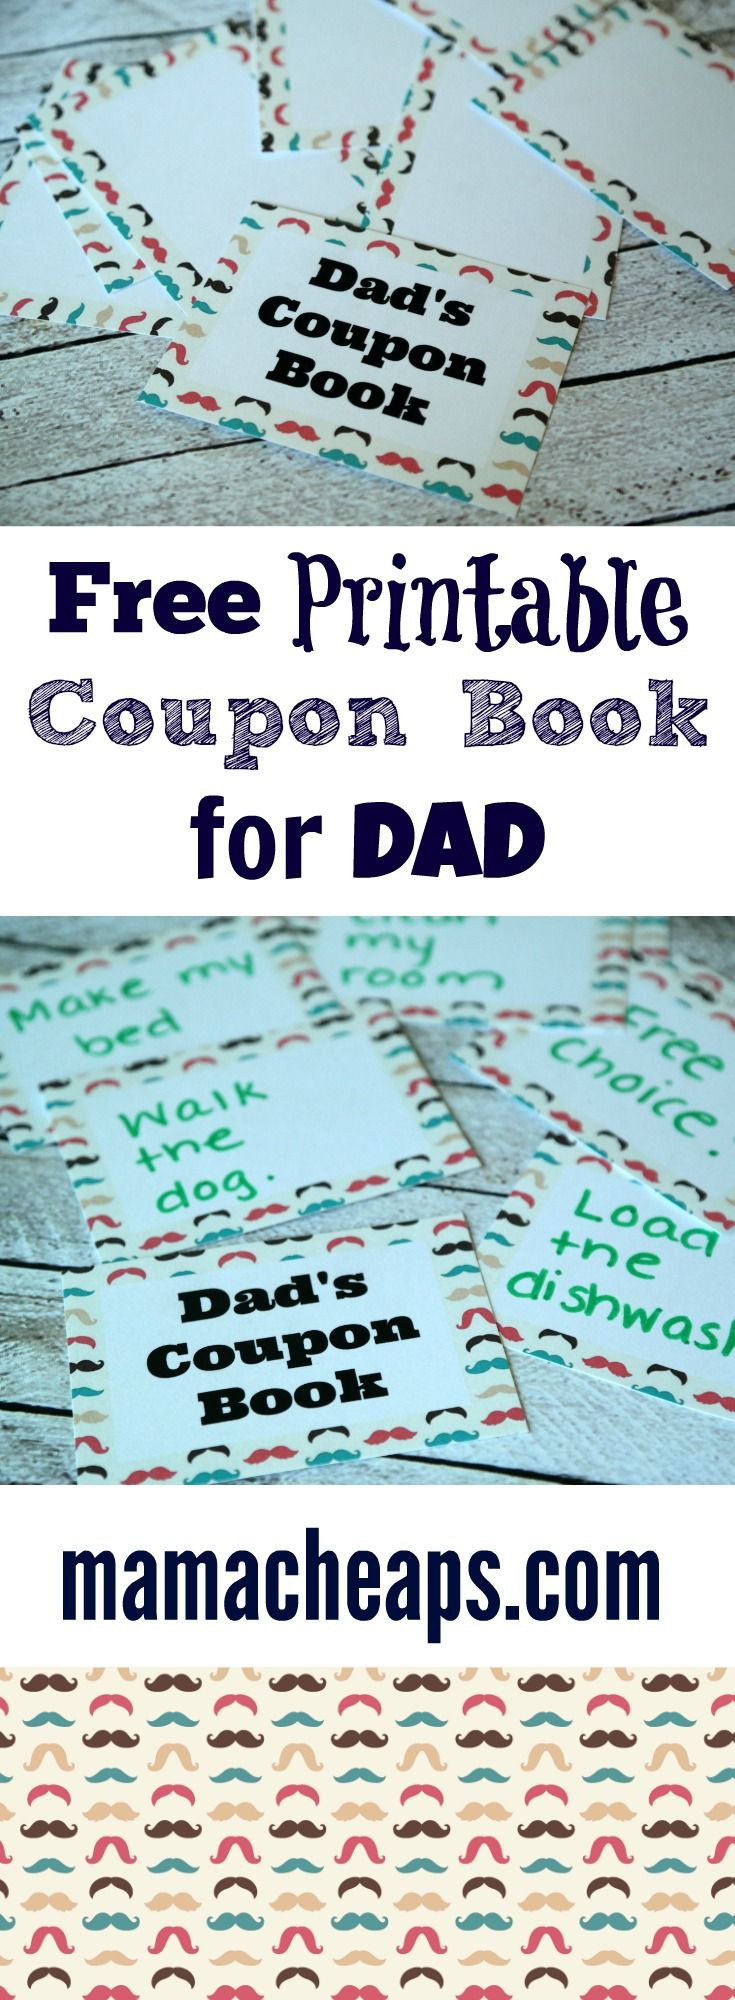 Mother's Day Coupon Book Ideas
 Free Printable Coupon Book for Dad